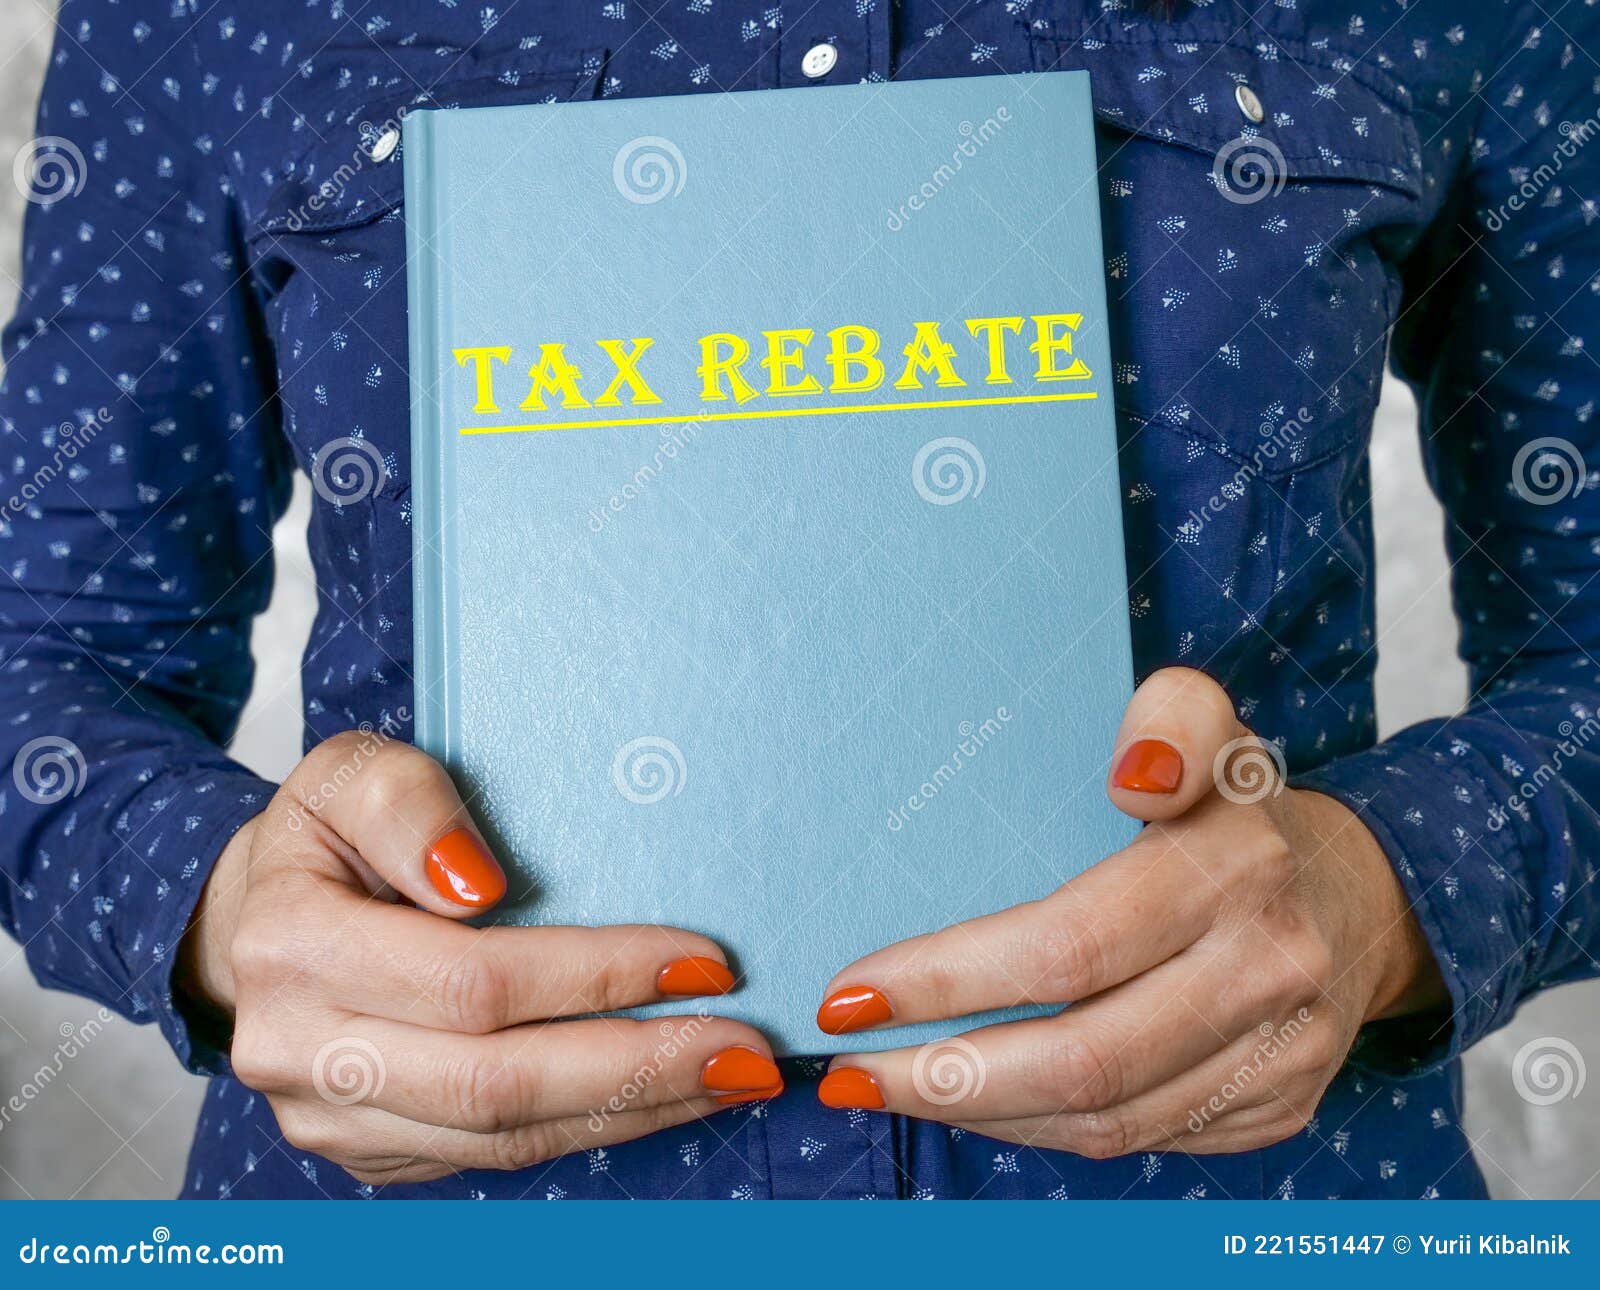 Meaning Of Rebate In Service Tax